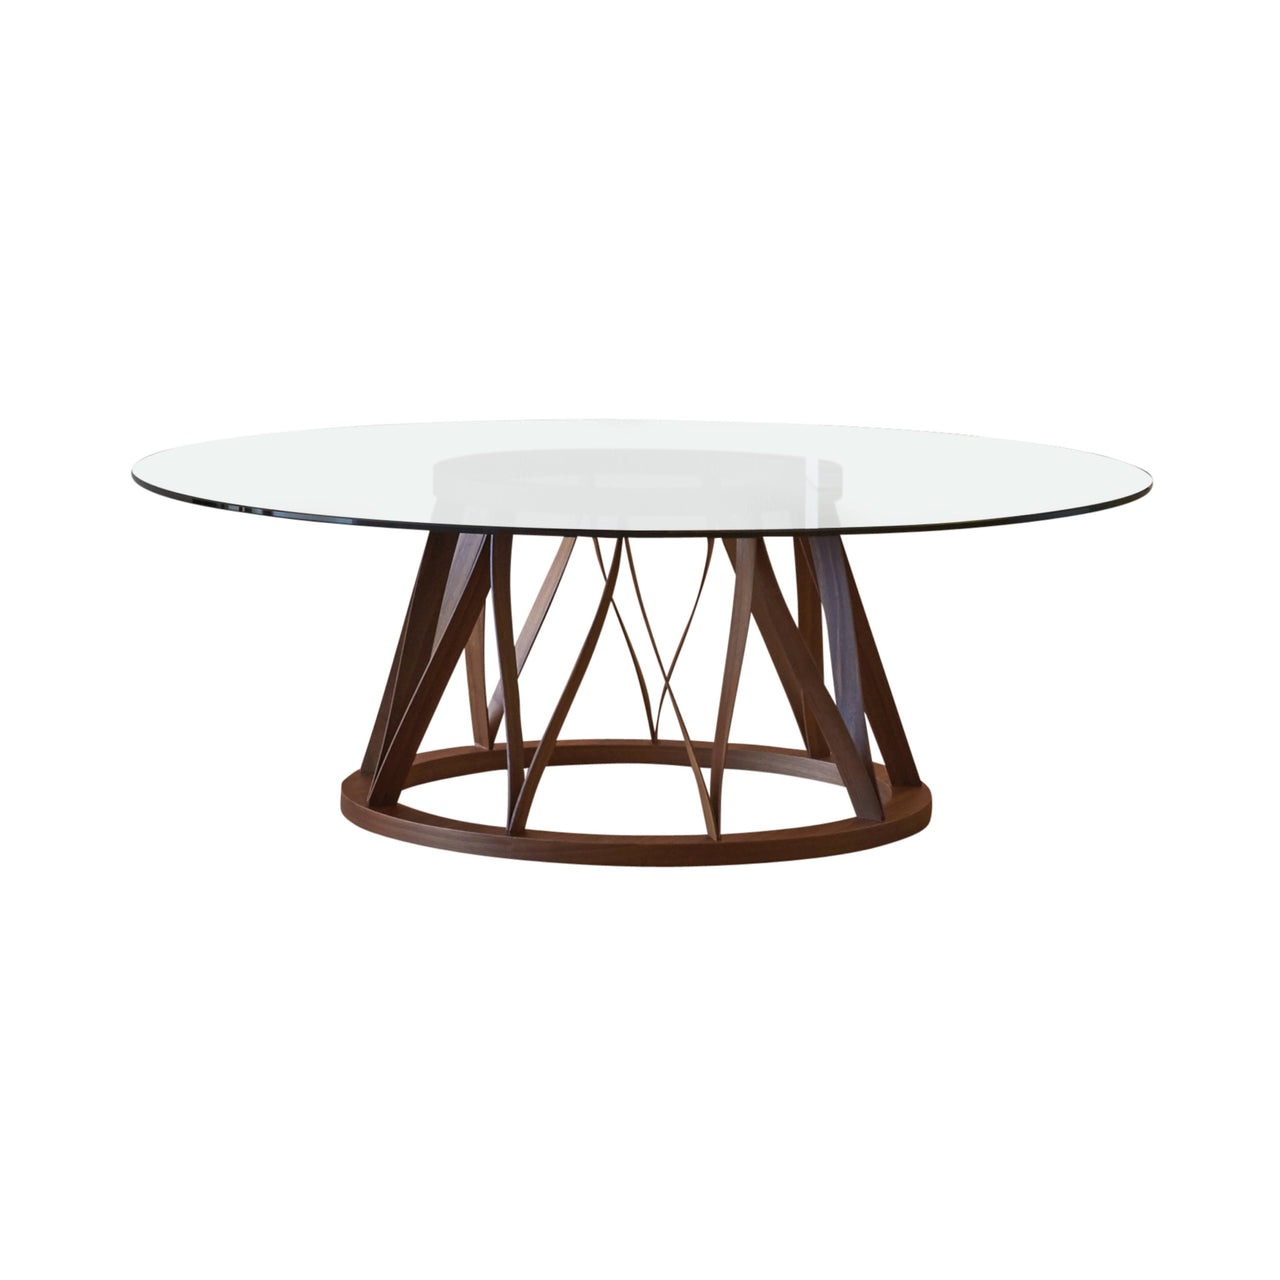 Acco Coffee Table: Large - 39.4